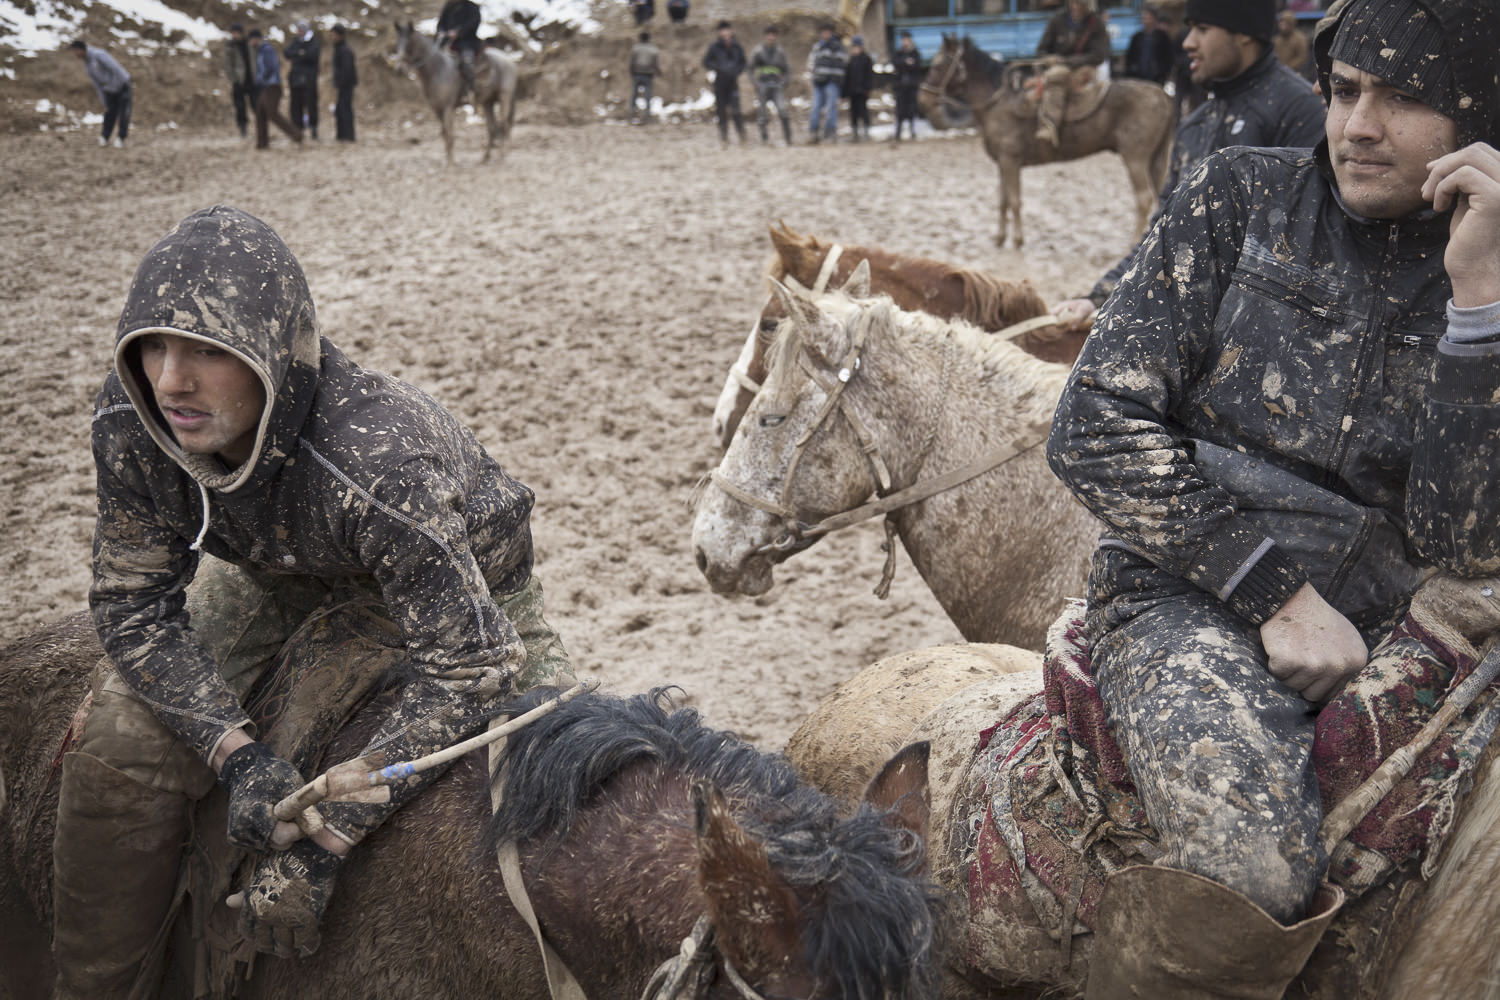  Tired buzkashi playing youths take rest during a muddy match. Popular throughout much of Central Asia, buzkashi is a form of horse polo in which horseback players wrestle a goat carcass across a playing field. 